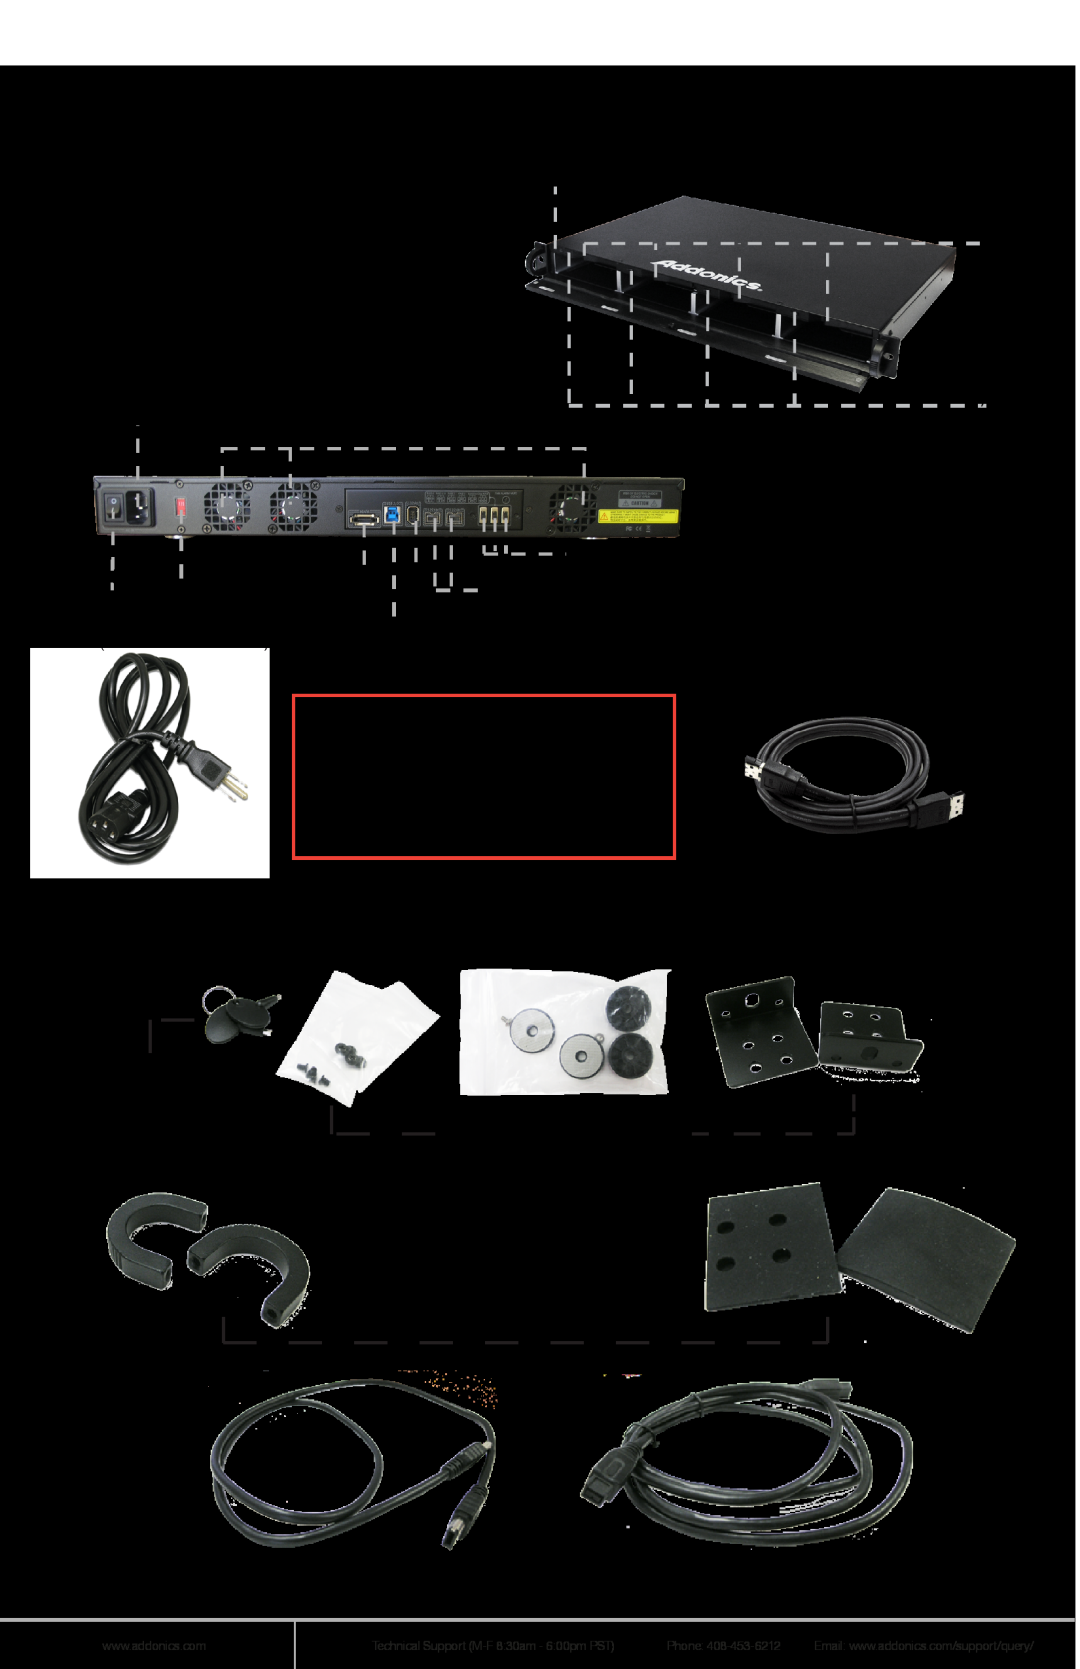 Addonics Technologies R1ESU3F Unpacking and Overview, Front Door keys Rack Mounting kit Desktop accessories, FW 400 Cable 